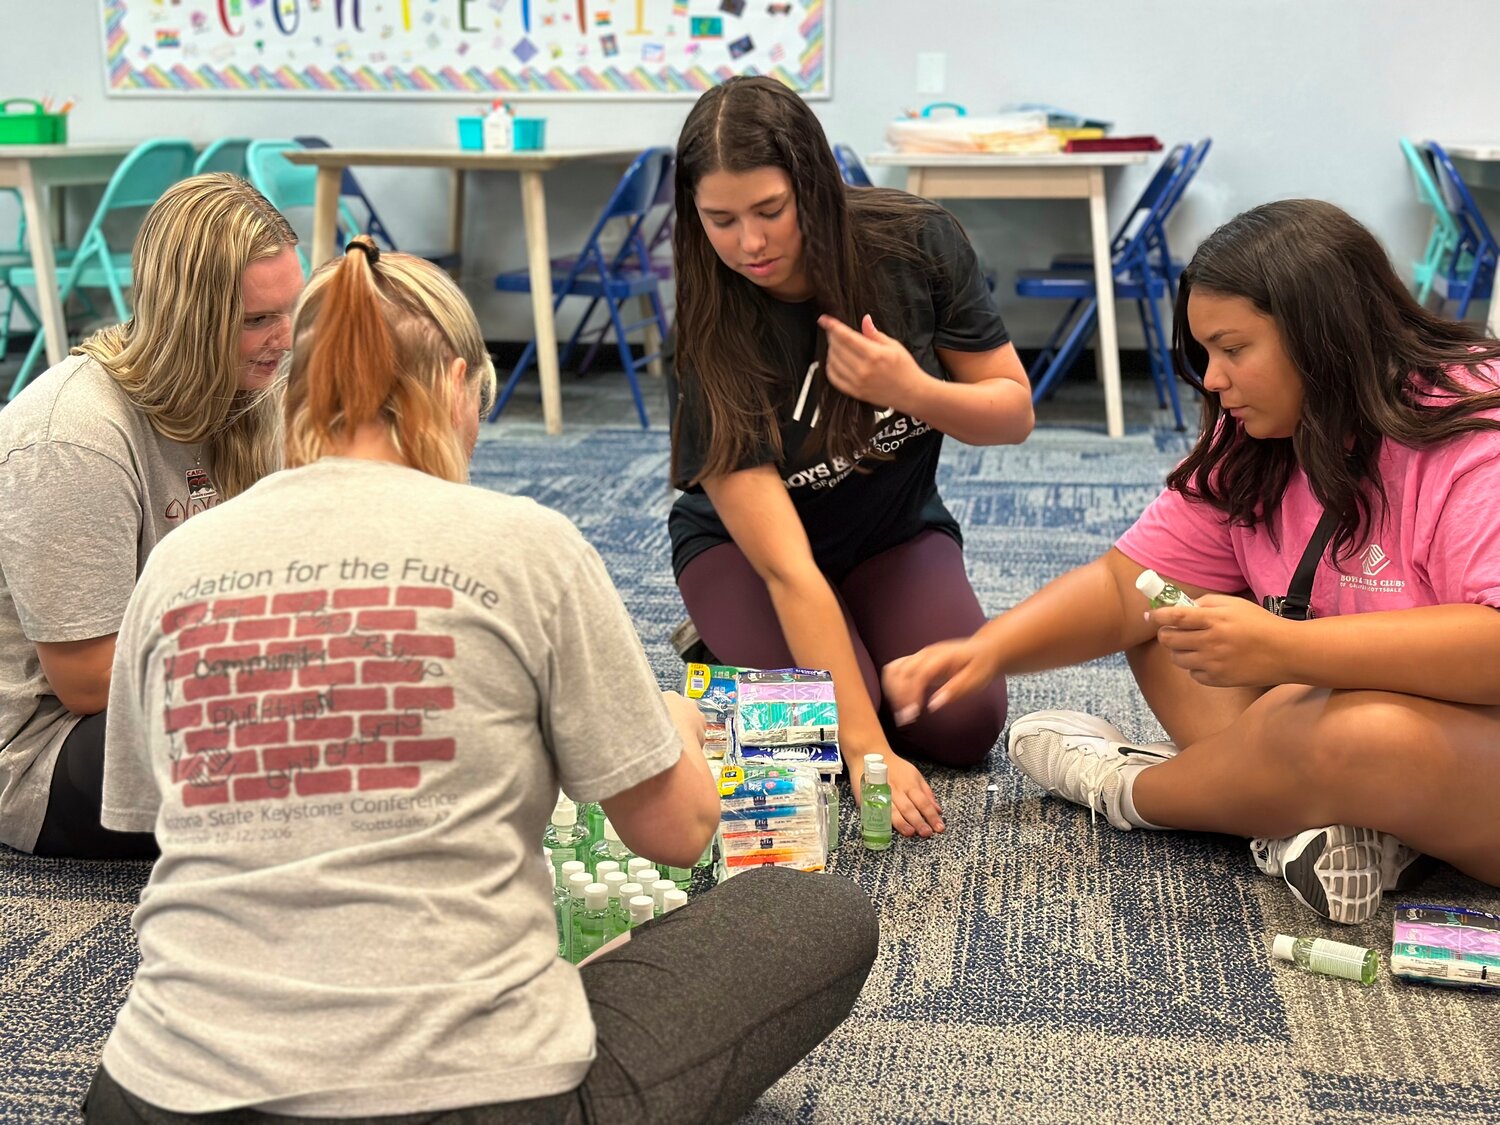 Addison Beer, 17, second from right, and Jaylin Wilson, 18, right, prepared for summer campers arriving next week at the Virginia G. Piper branch of the Boys & Girls Club where she works, in Scottsdale, Ariz. With the job market the tightest in half a century, younger workers are playing a critical role in kicking off the summer tourism season.